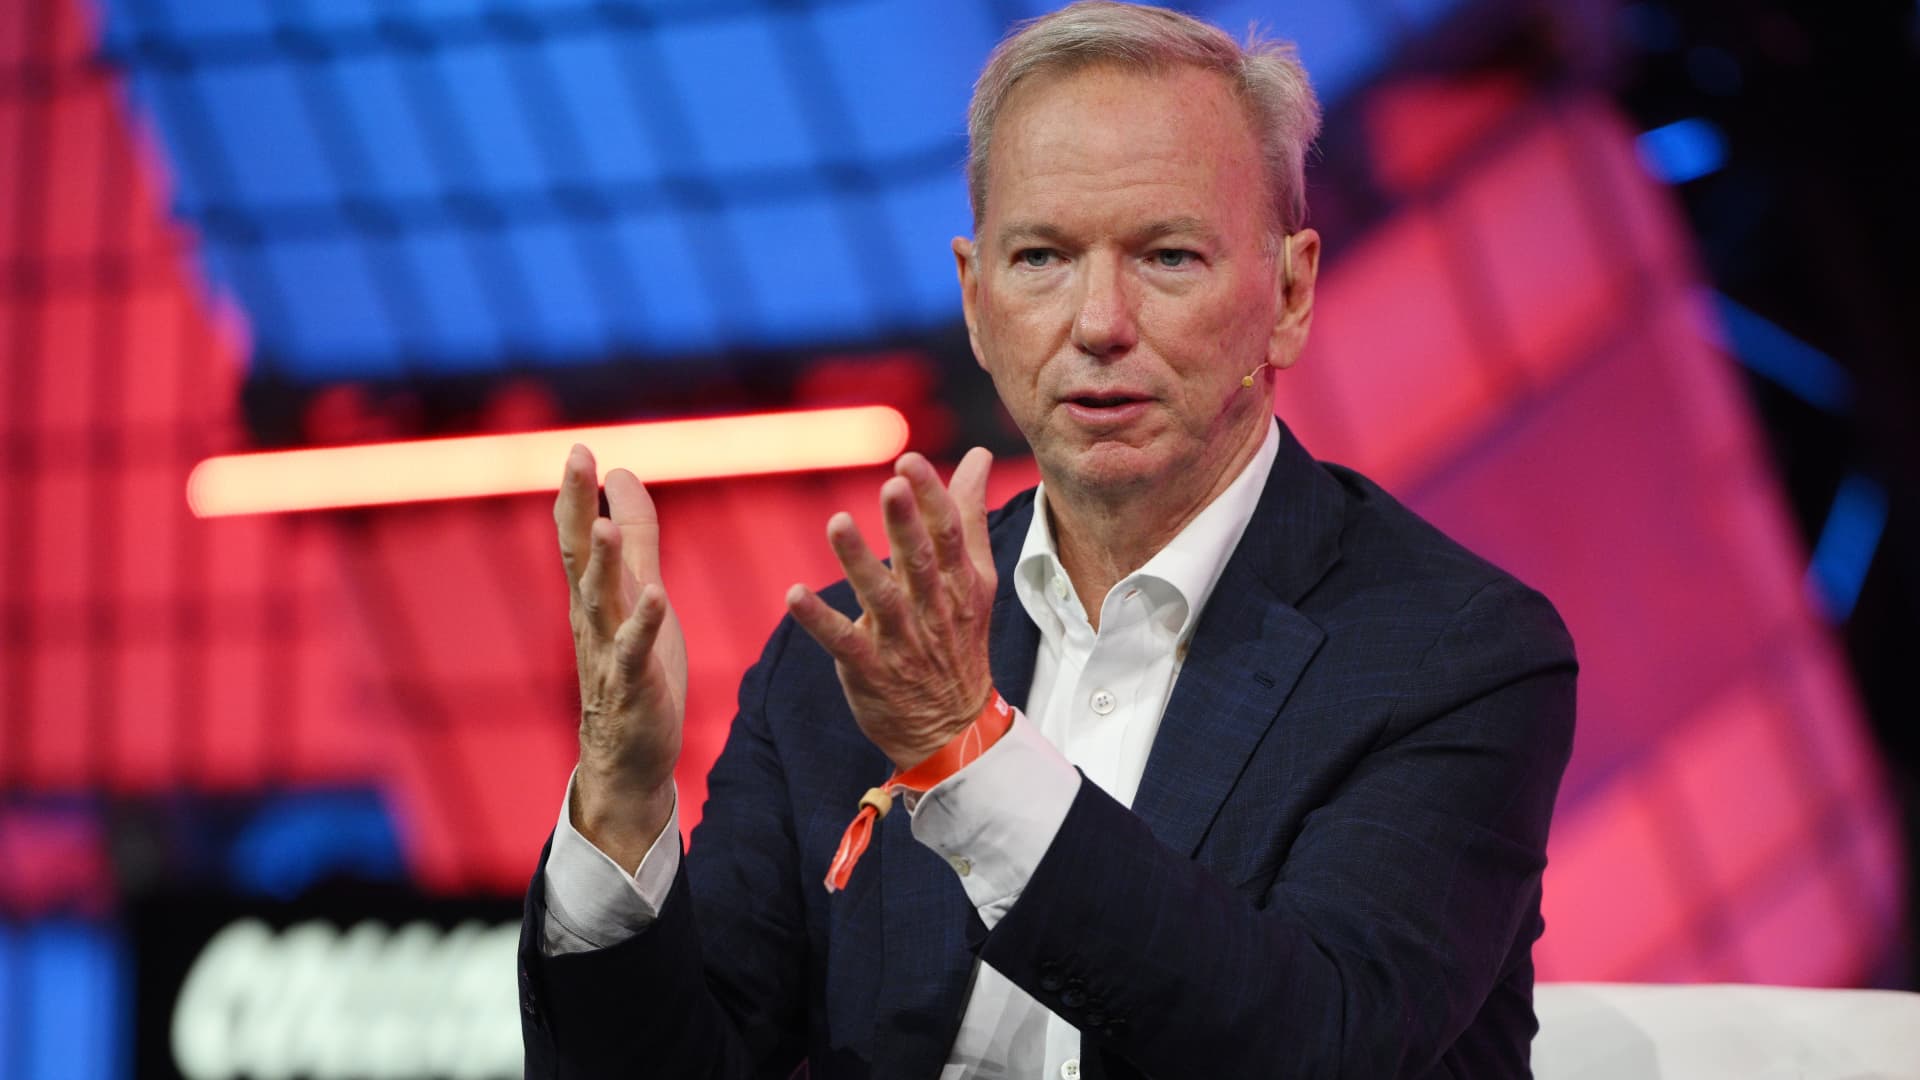 A.I. poses existential risk of people being 'harmed or killed,' ex-Google CEO Eric Schmidt says